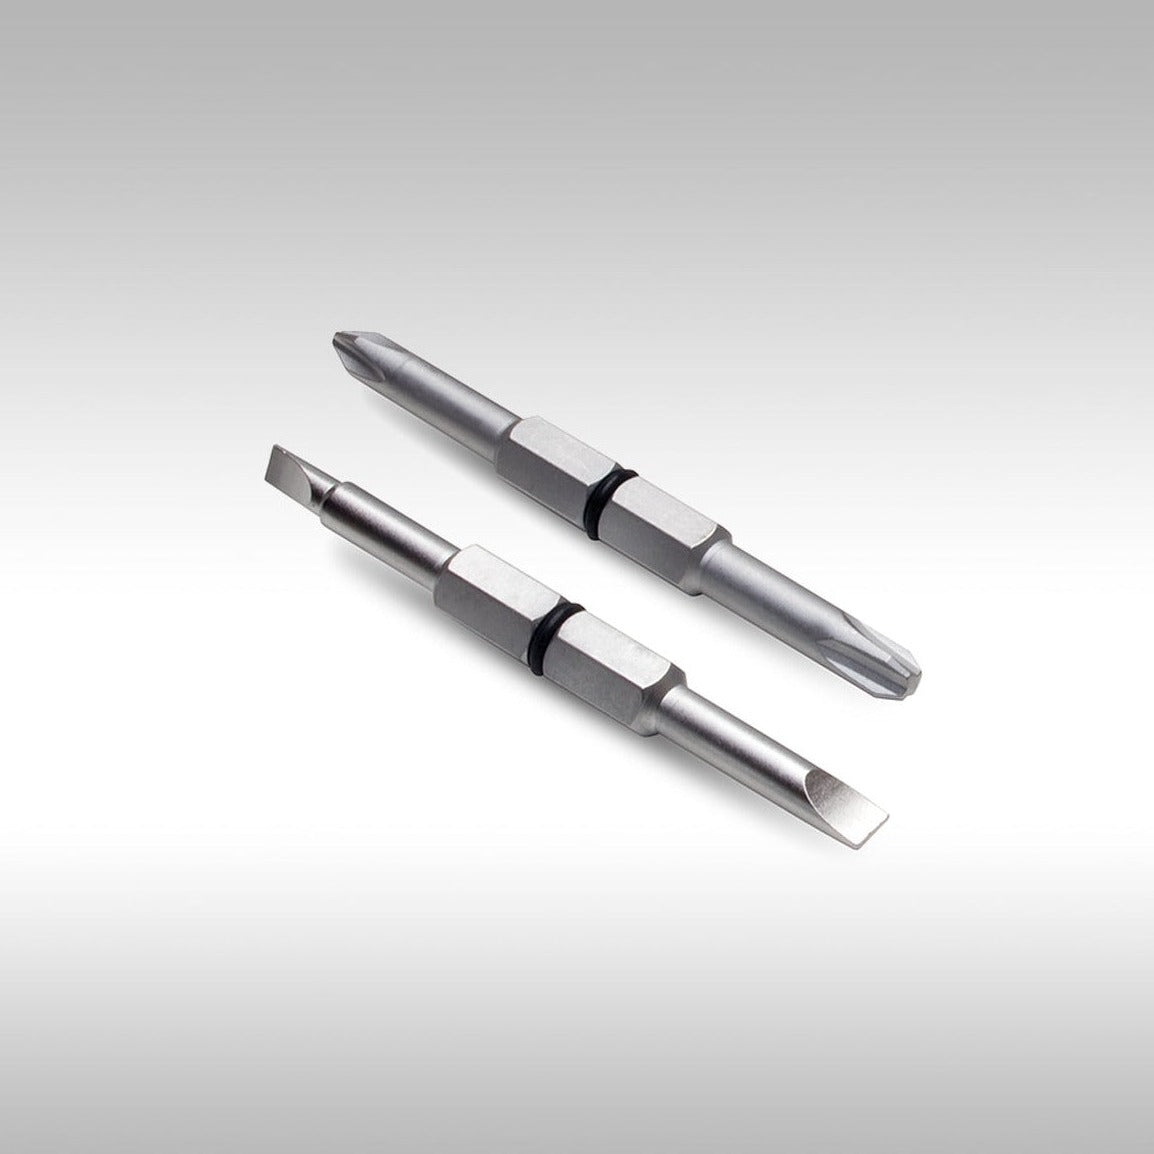 Motion Pro Tools bit set. Two bits with two tips each for a total of 4 tools. Phillips #2 and Phillips #3. Slotted ends small and medium. Work great with the MP Tool Metric.